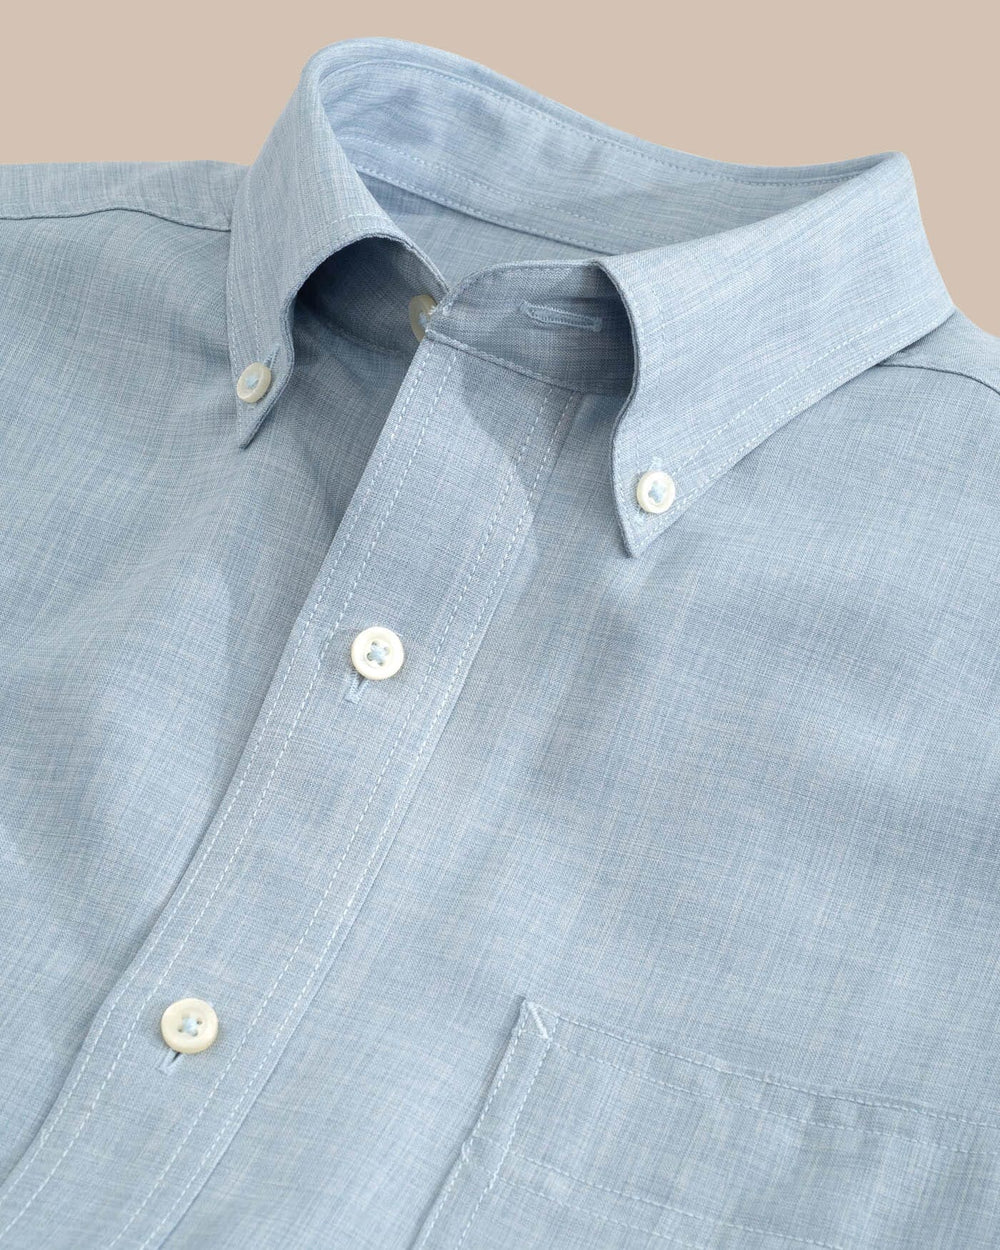 The detail of the Men's Grey Short Sleeve Dock Shirt by Southern Tide - Seagull Grey